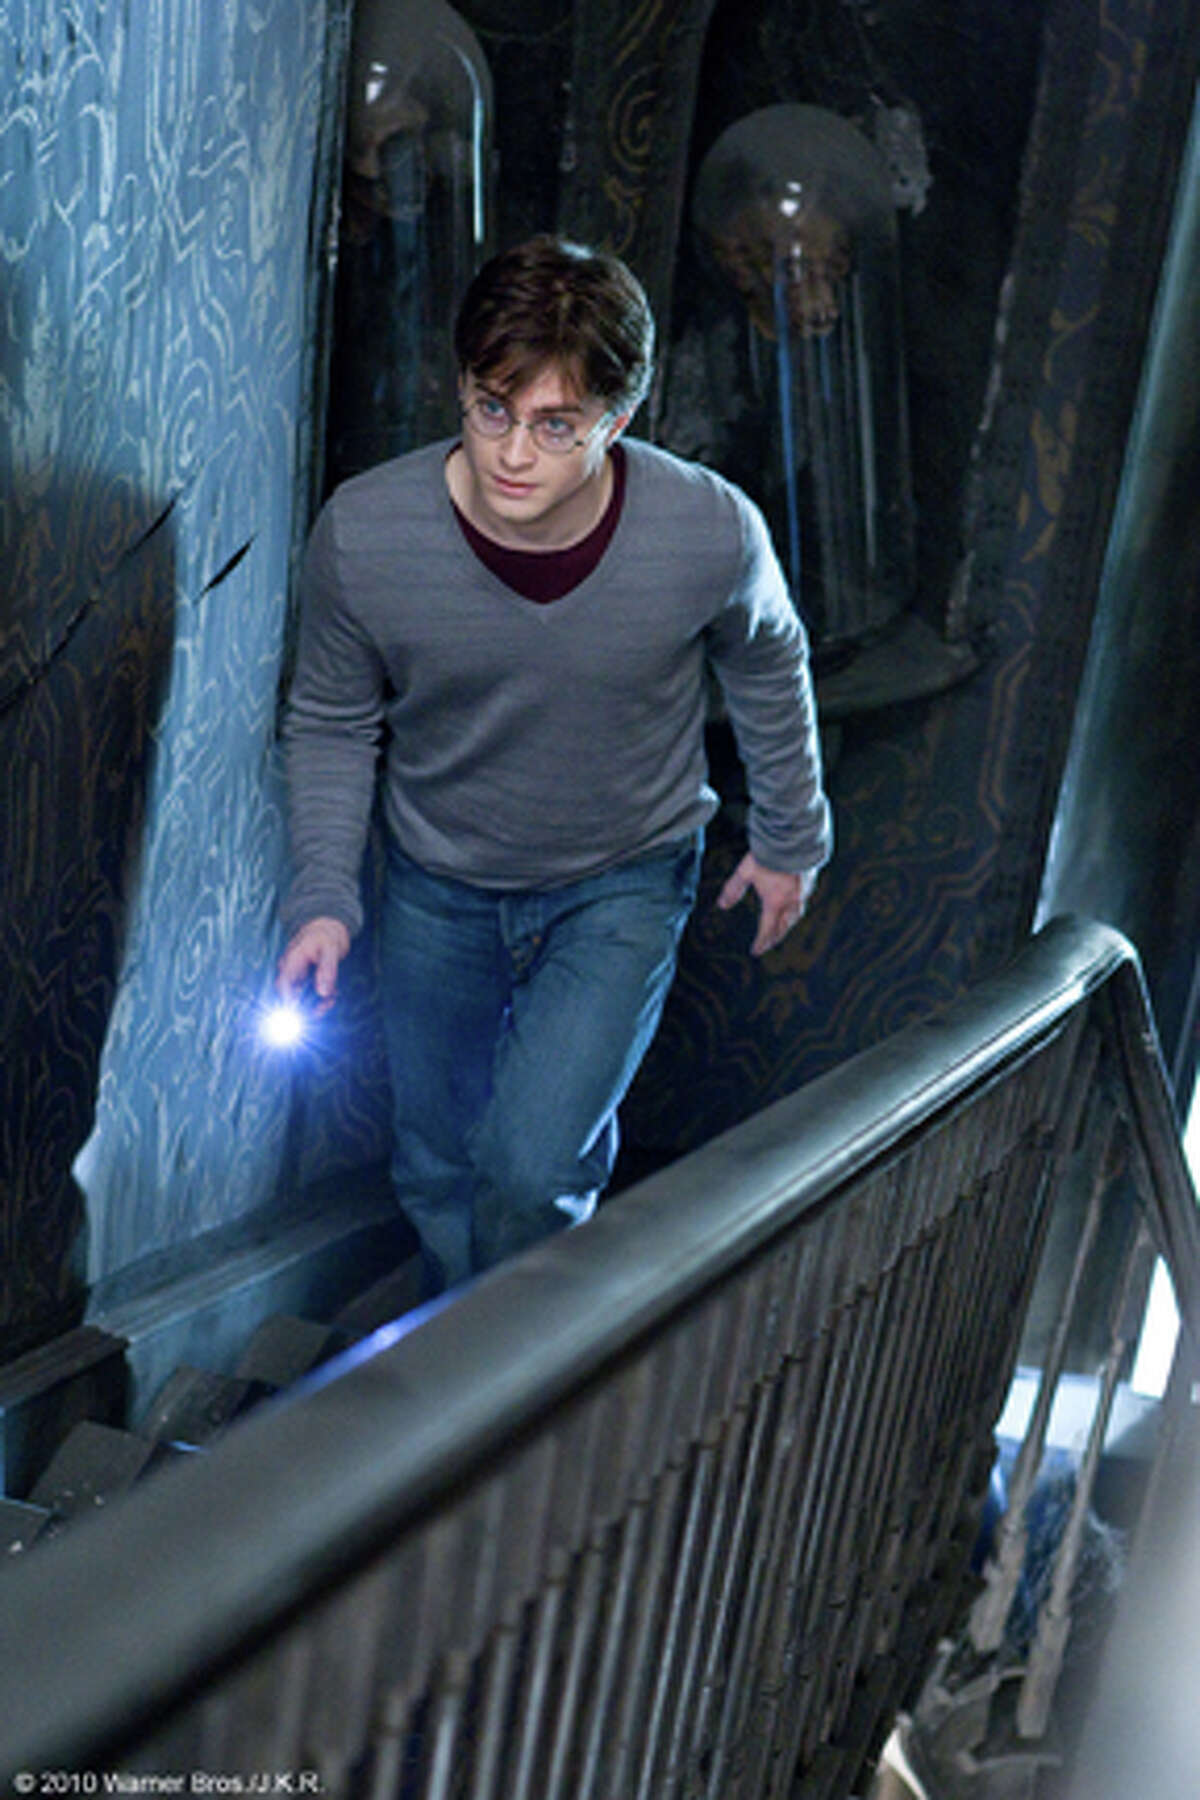 Daniel Radcliffe as Harry in "Harry Potter and the Deathly Hallows: Part 1."